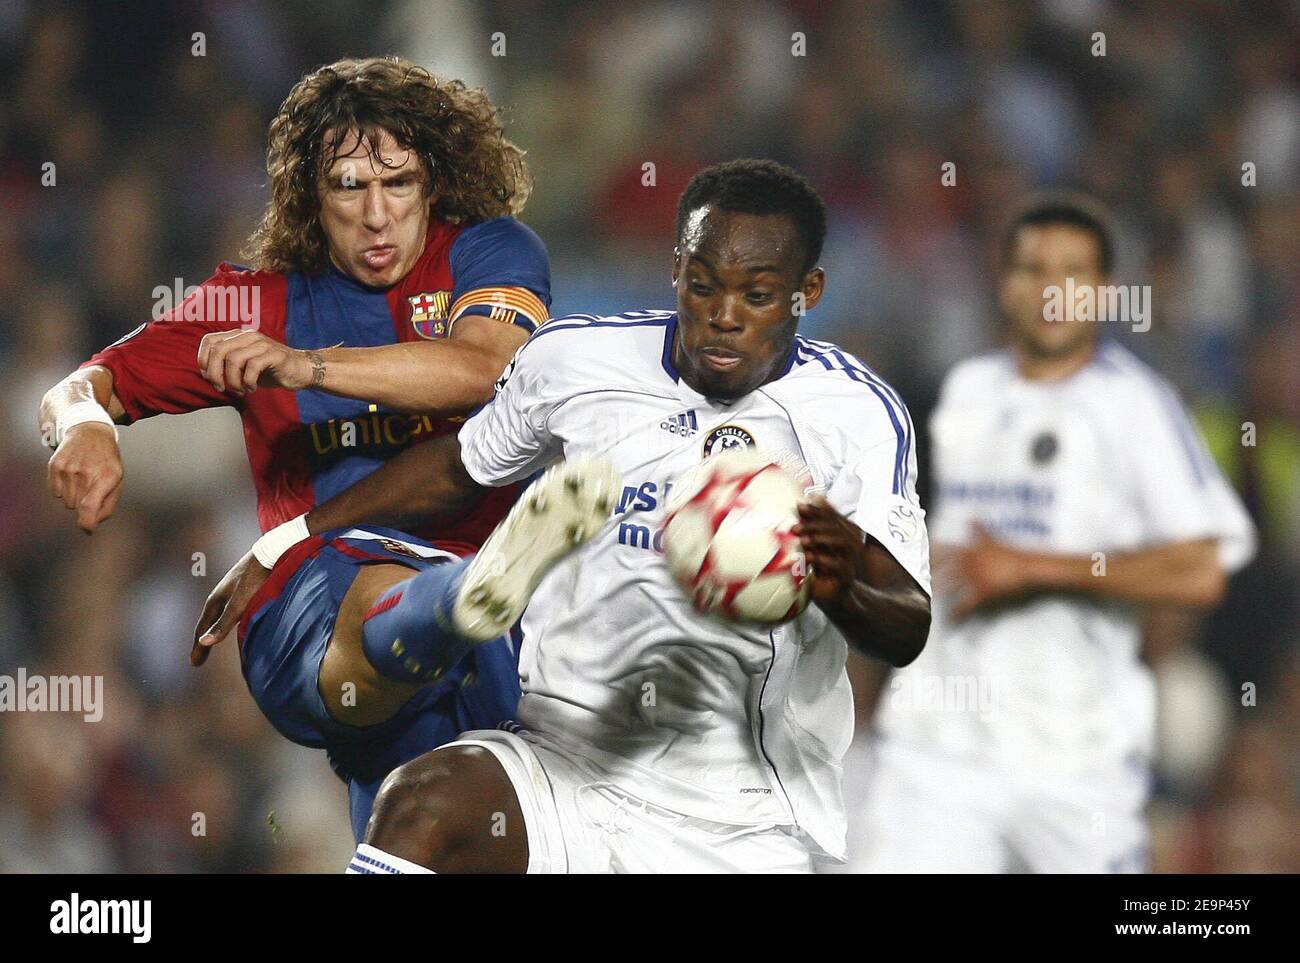 Barcelona's Carles Puyol and Chelsea's Michael Essien battle for the ball during the UEFA Champions League, Group A, Barcelona vs Chelsea at the Camp Nou stadium in Barcelona, Spain on October 31, 2006. The match ended in a 2-2 draw. Photo by Christian Liewig/ABACAPRESS.COM Stock Photo